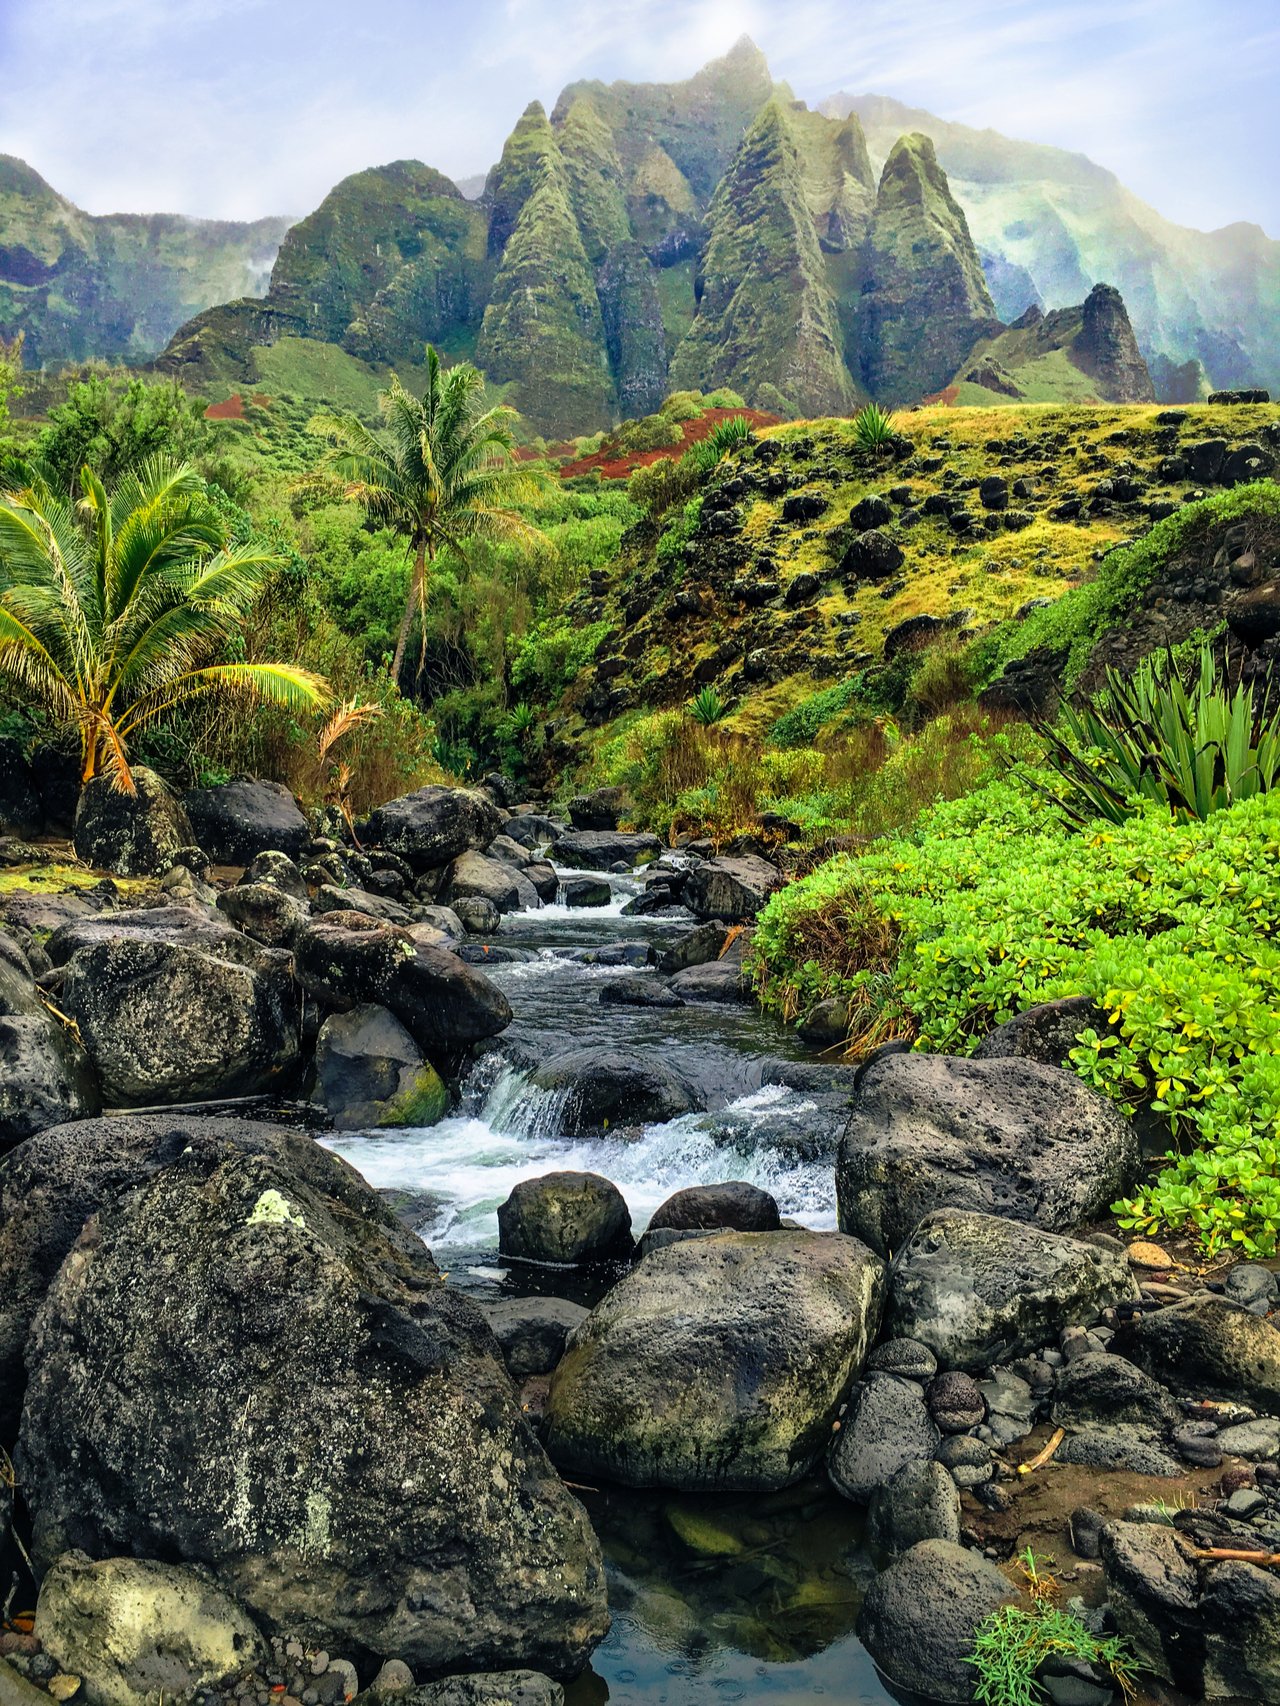 The 15 Best Hikes in Hawaii